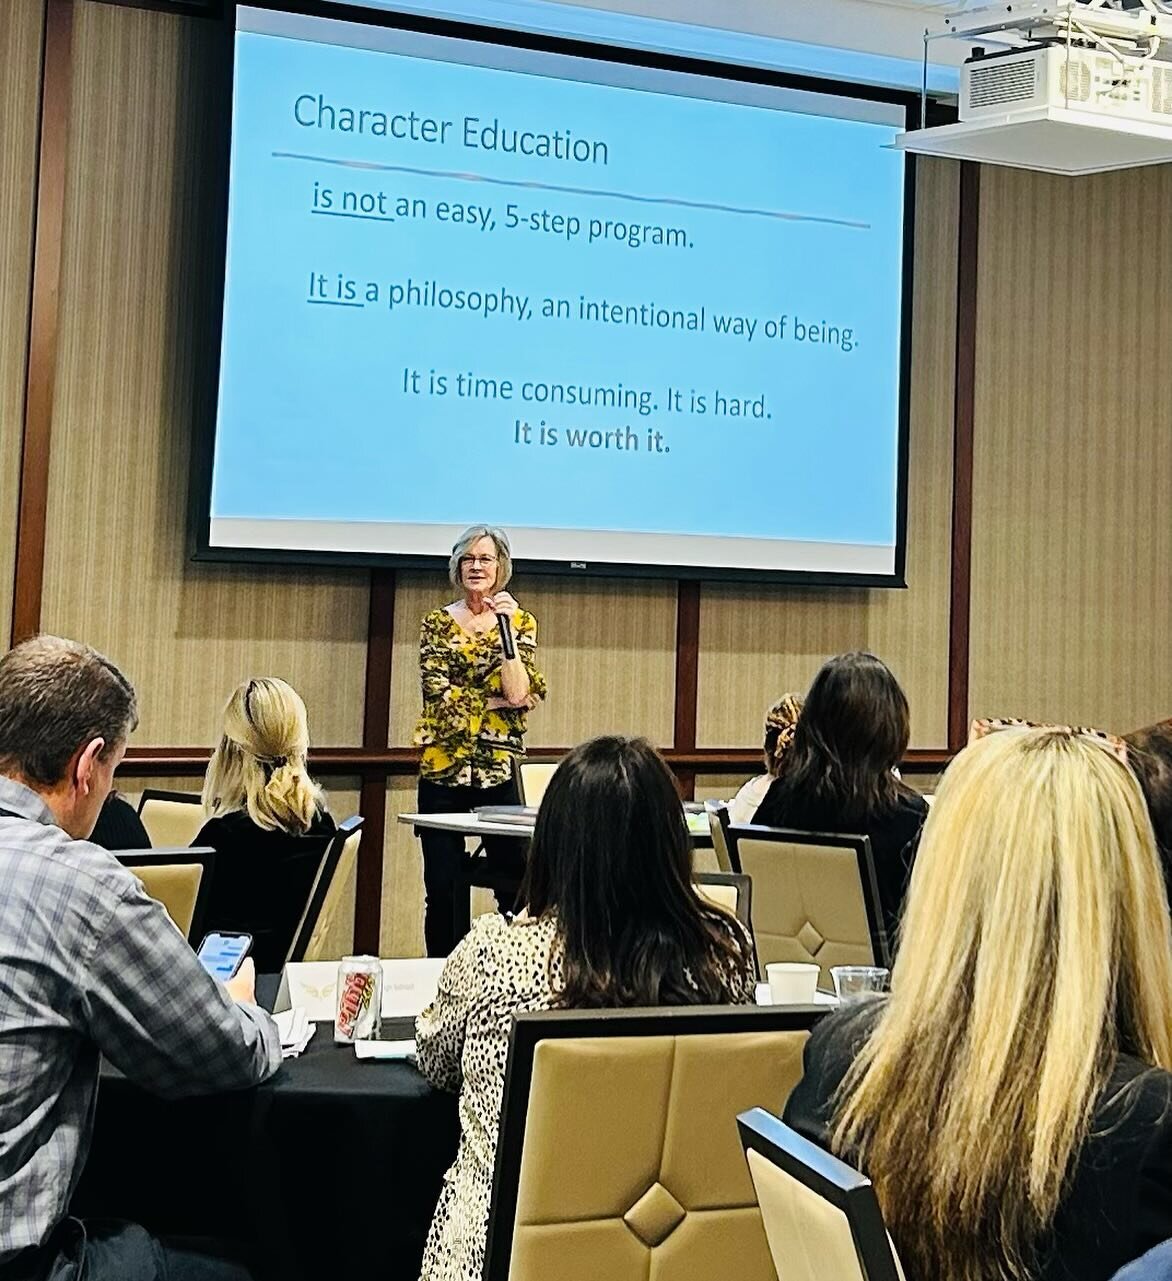 &ldquo;My hope is that you intentionally choose to do what is important instead of being trapped in the urgent. Impact your students by helping them to be good people. Matter.&rdquo;
- Dr. Amy Johnston